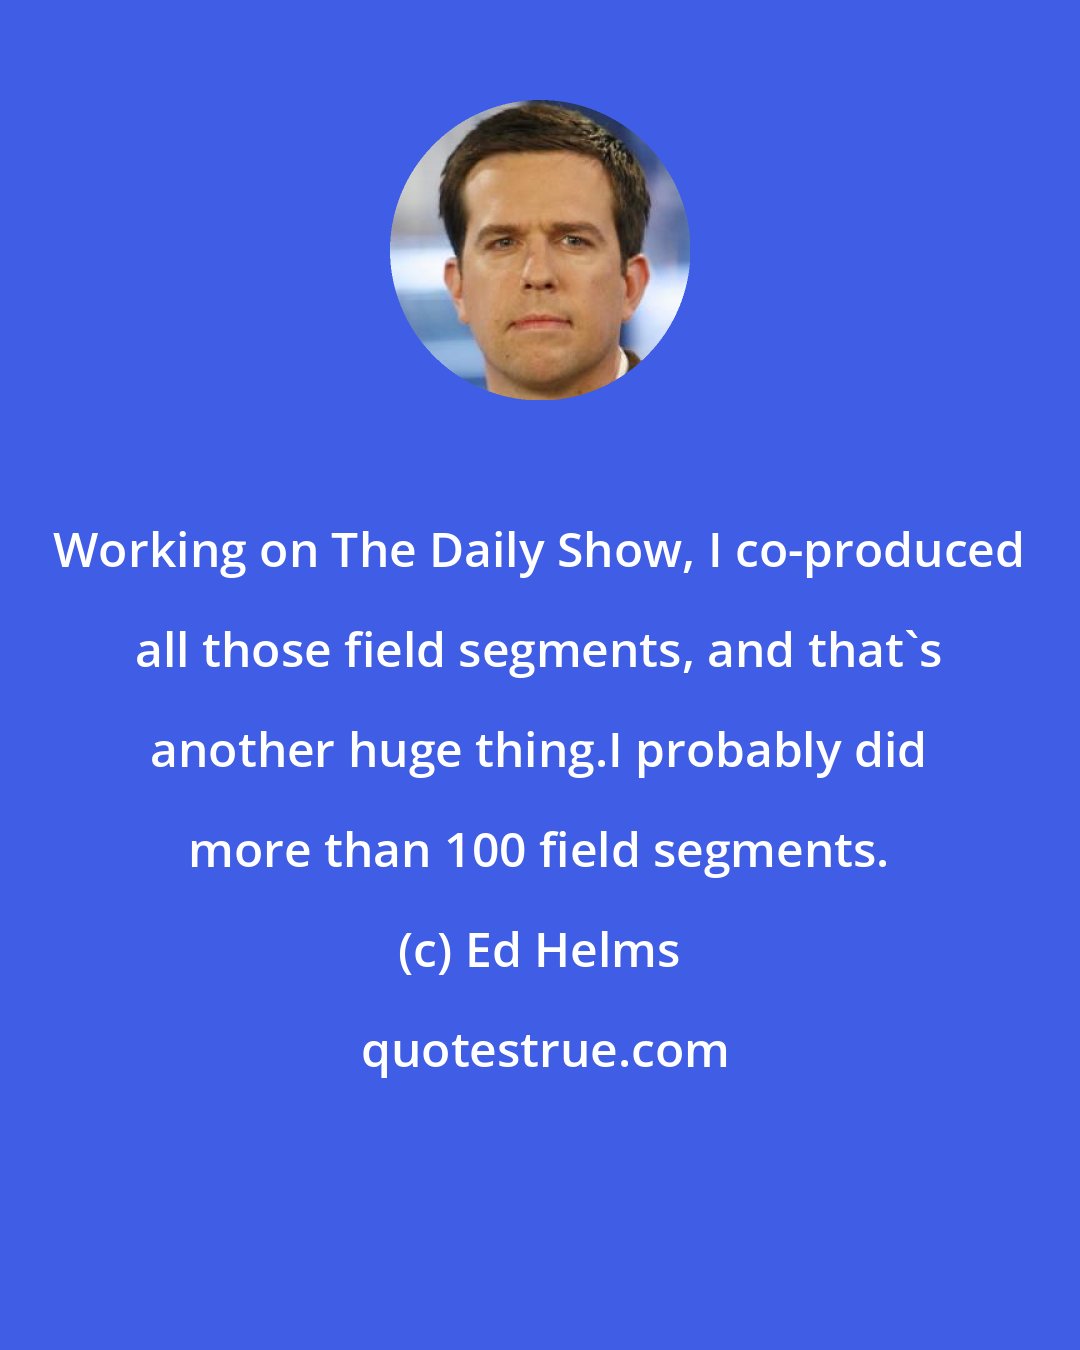 Ed Helms: Working on The Daily Show, I co-produced all those field segments, and that's another huge thing.I probably did more than 100 field segments.